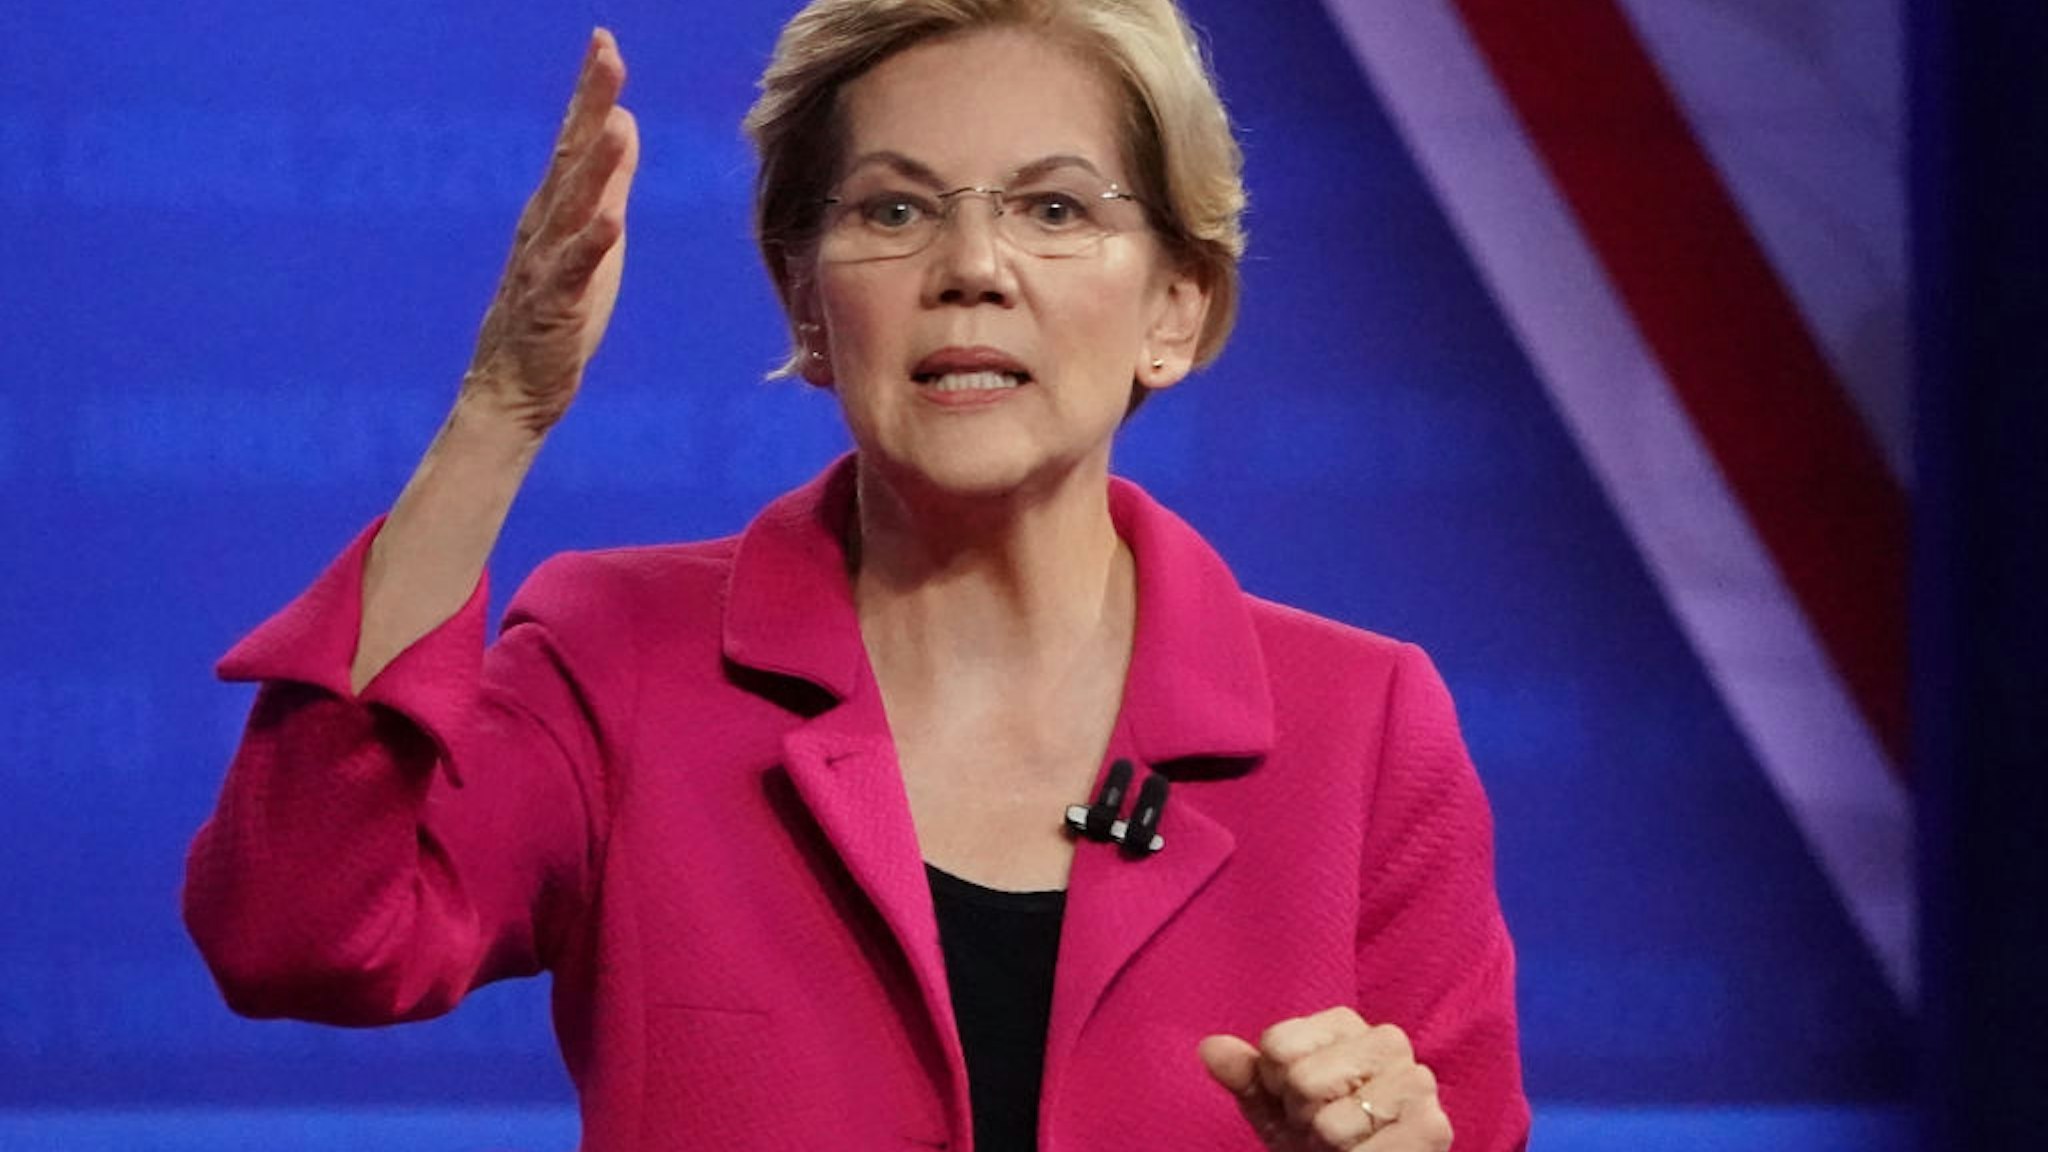 Elizabeth Warren speaks at the Human Rights Campaign Foundation